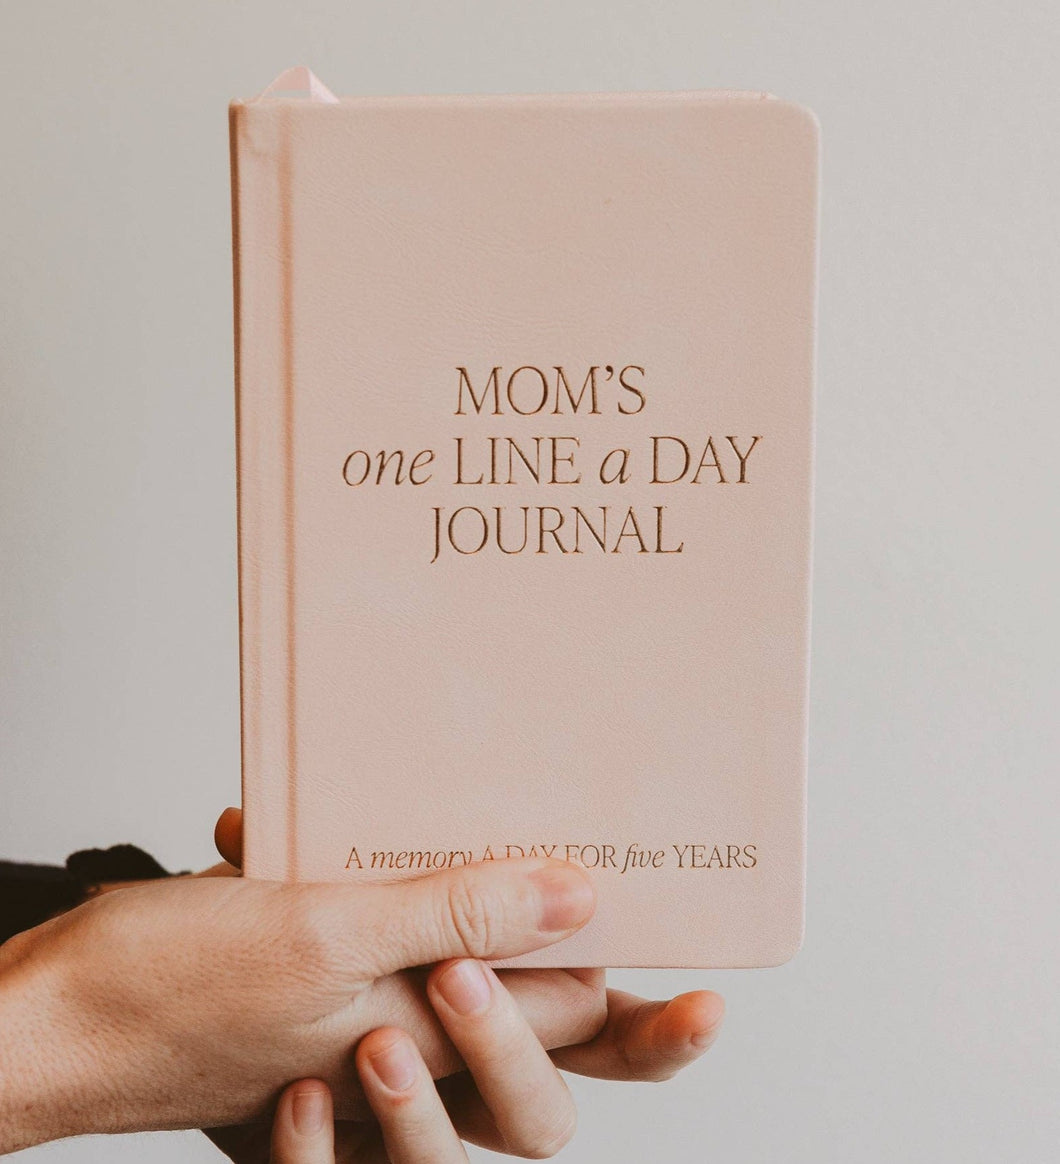 Mom's one line a day journal: A memory a day for 5 years. 